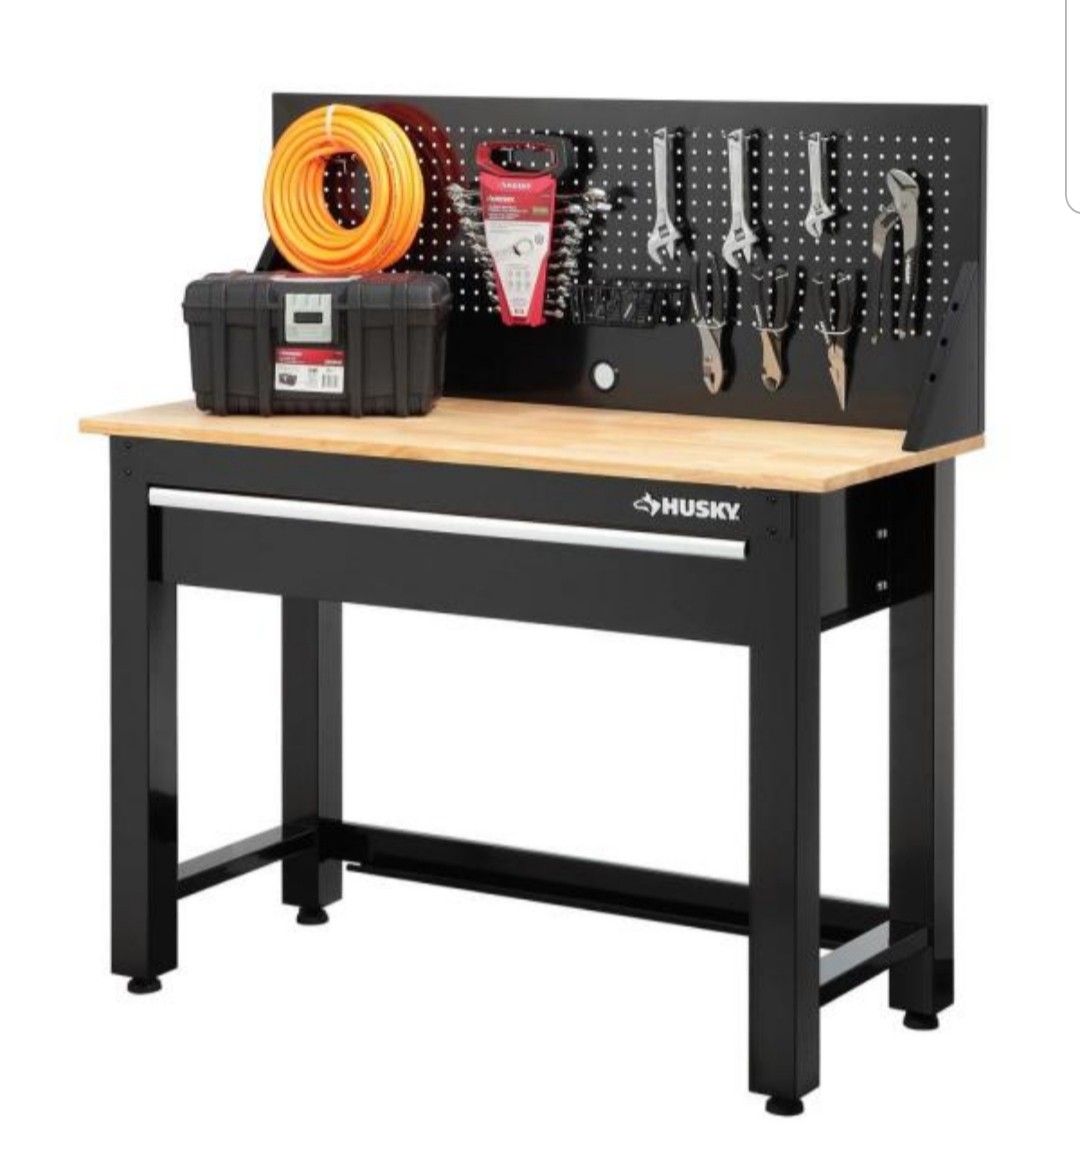 Husky 4 ft Solid Wood Top Workbench with Drawer 52x48x20 NEW in Box Retail $336.99